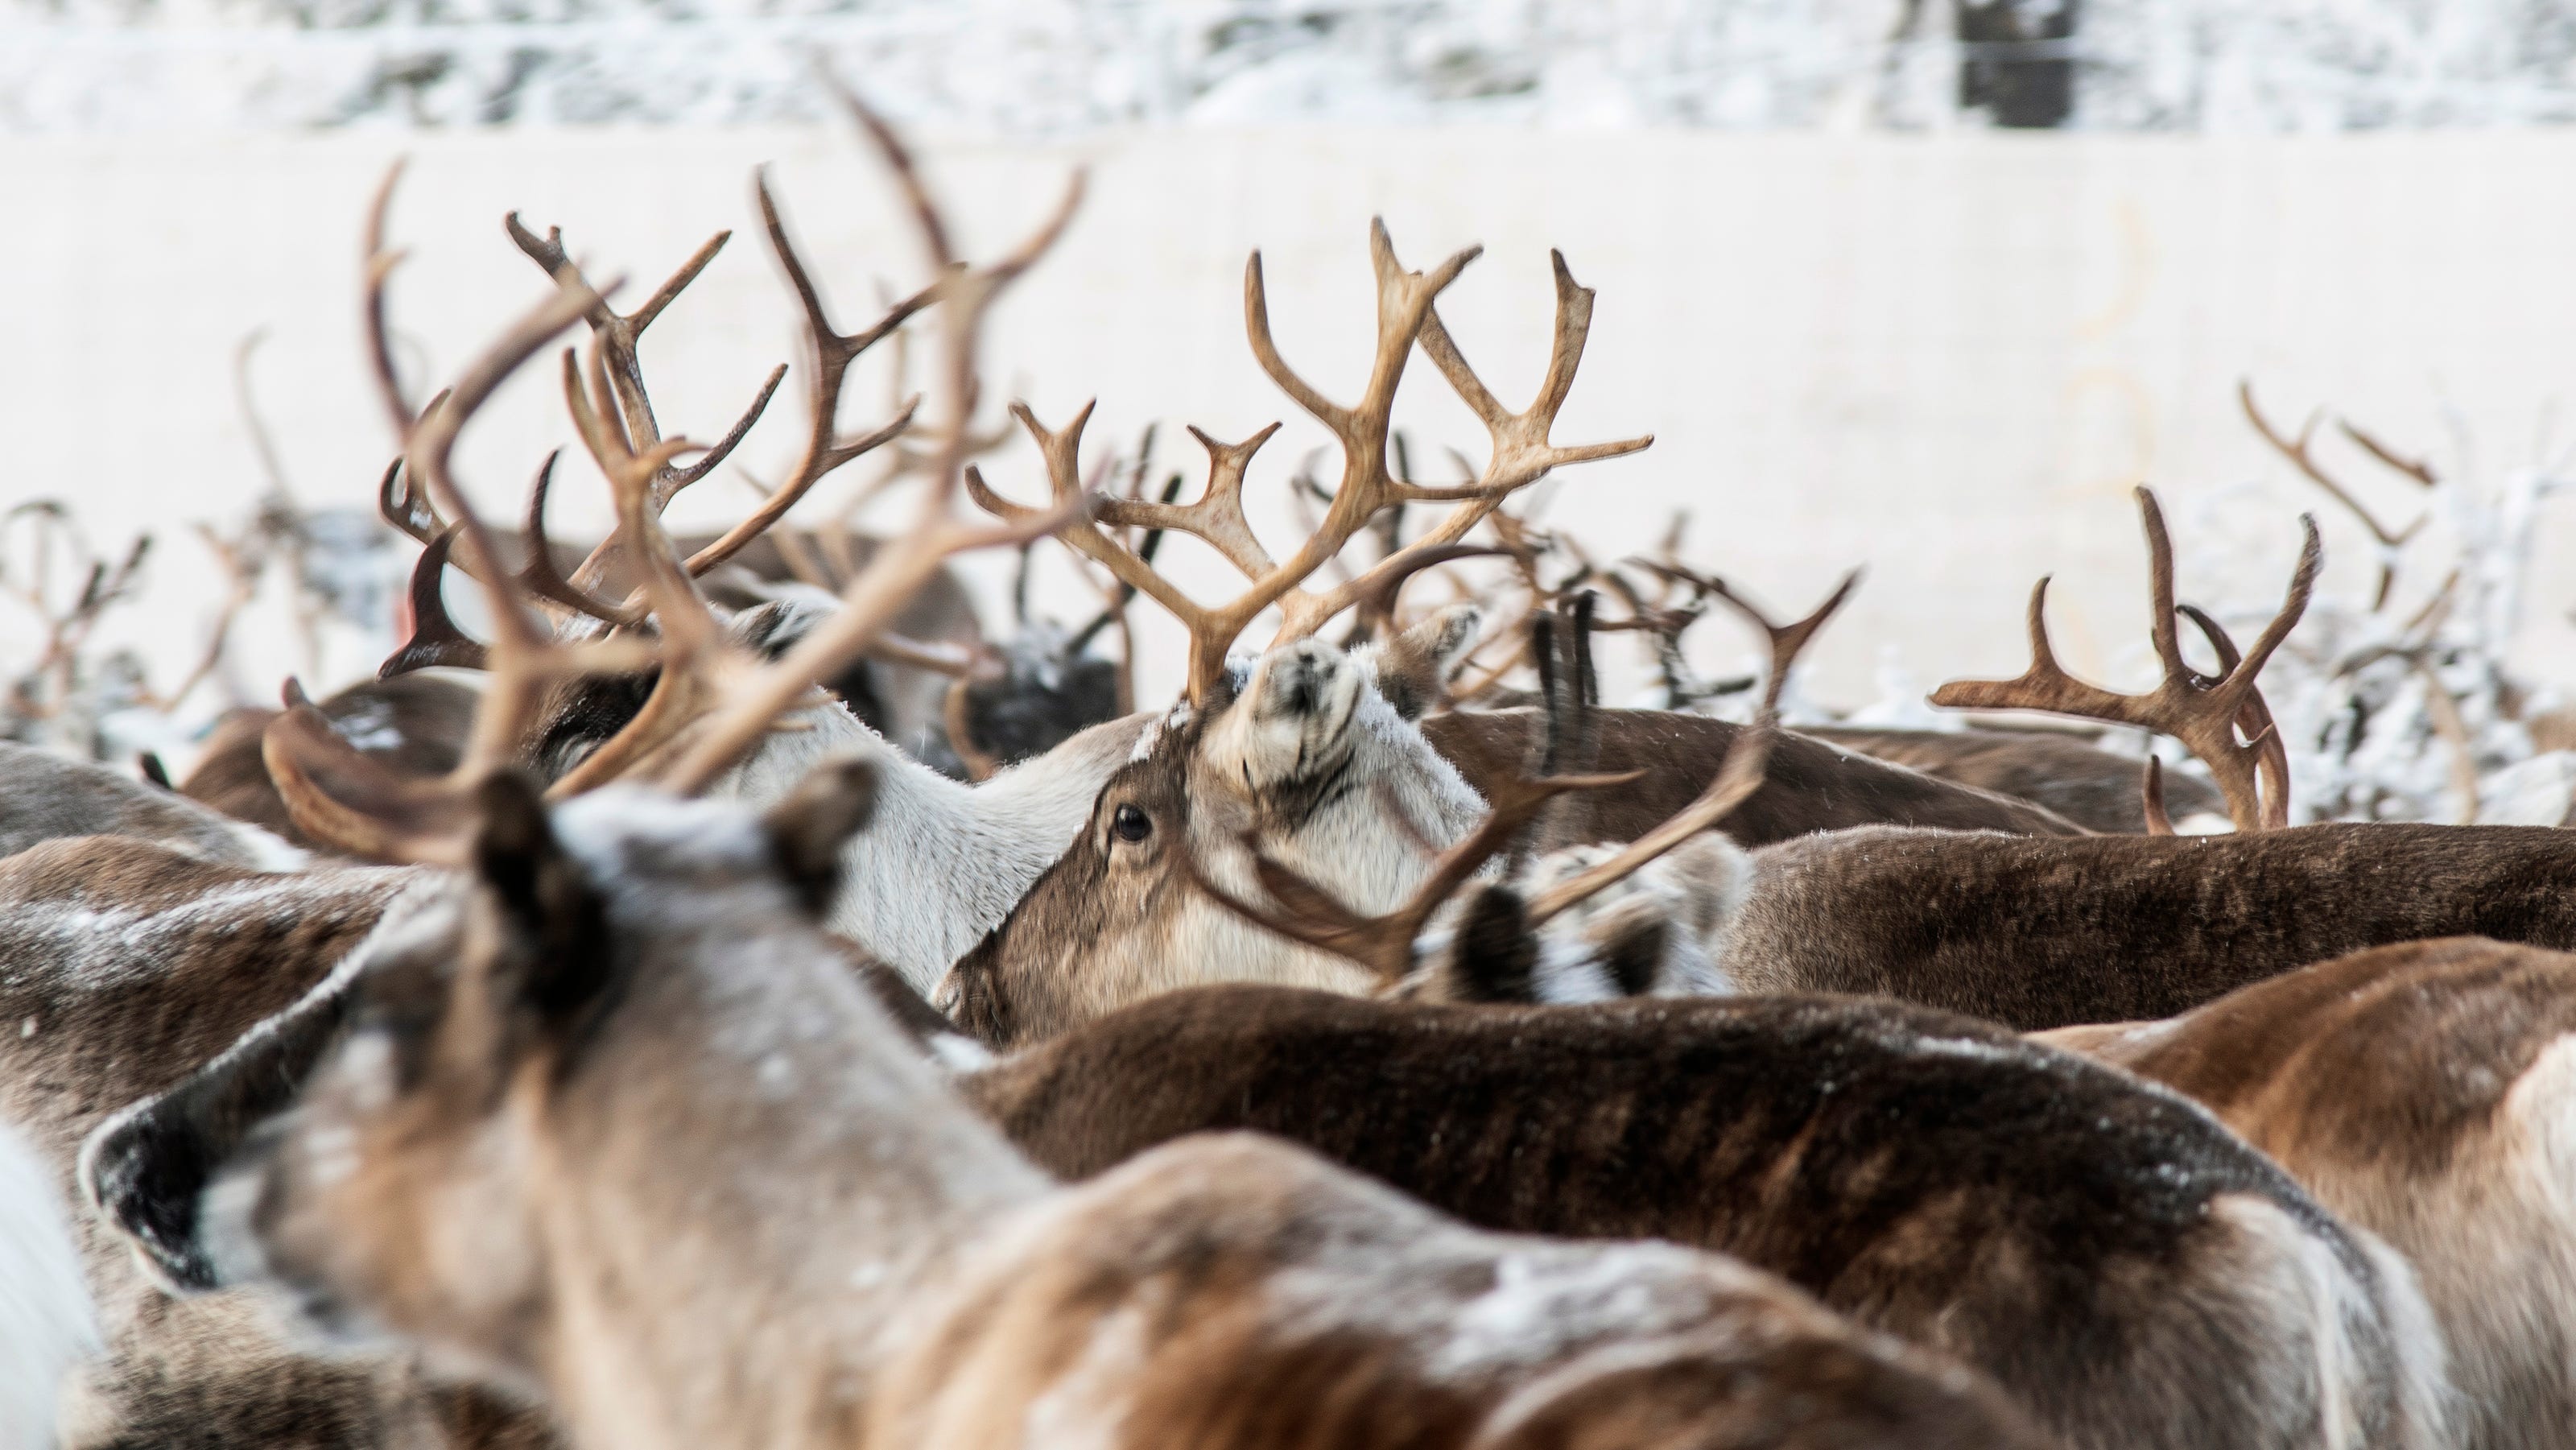 Climate change brings 'strange weather,' leaves reindeer starving in Sweden's arctic - USA TODAY